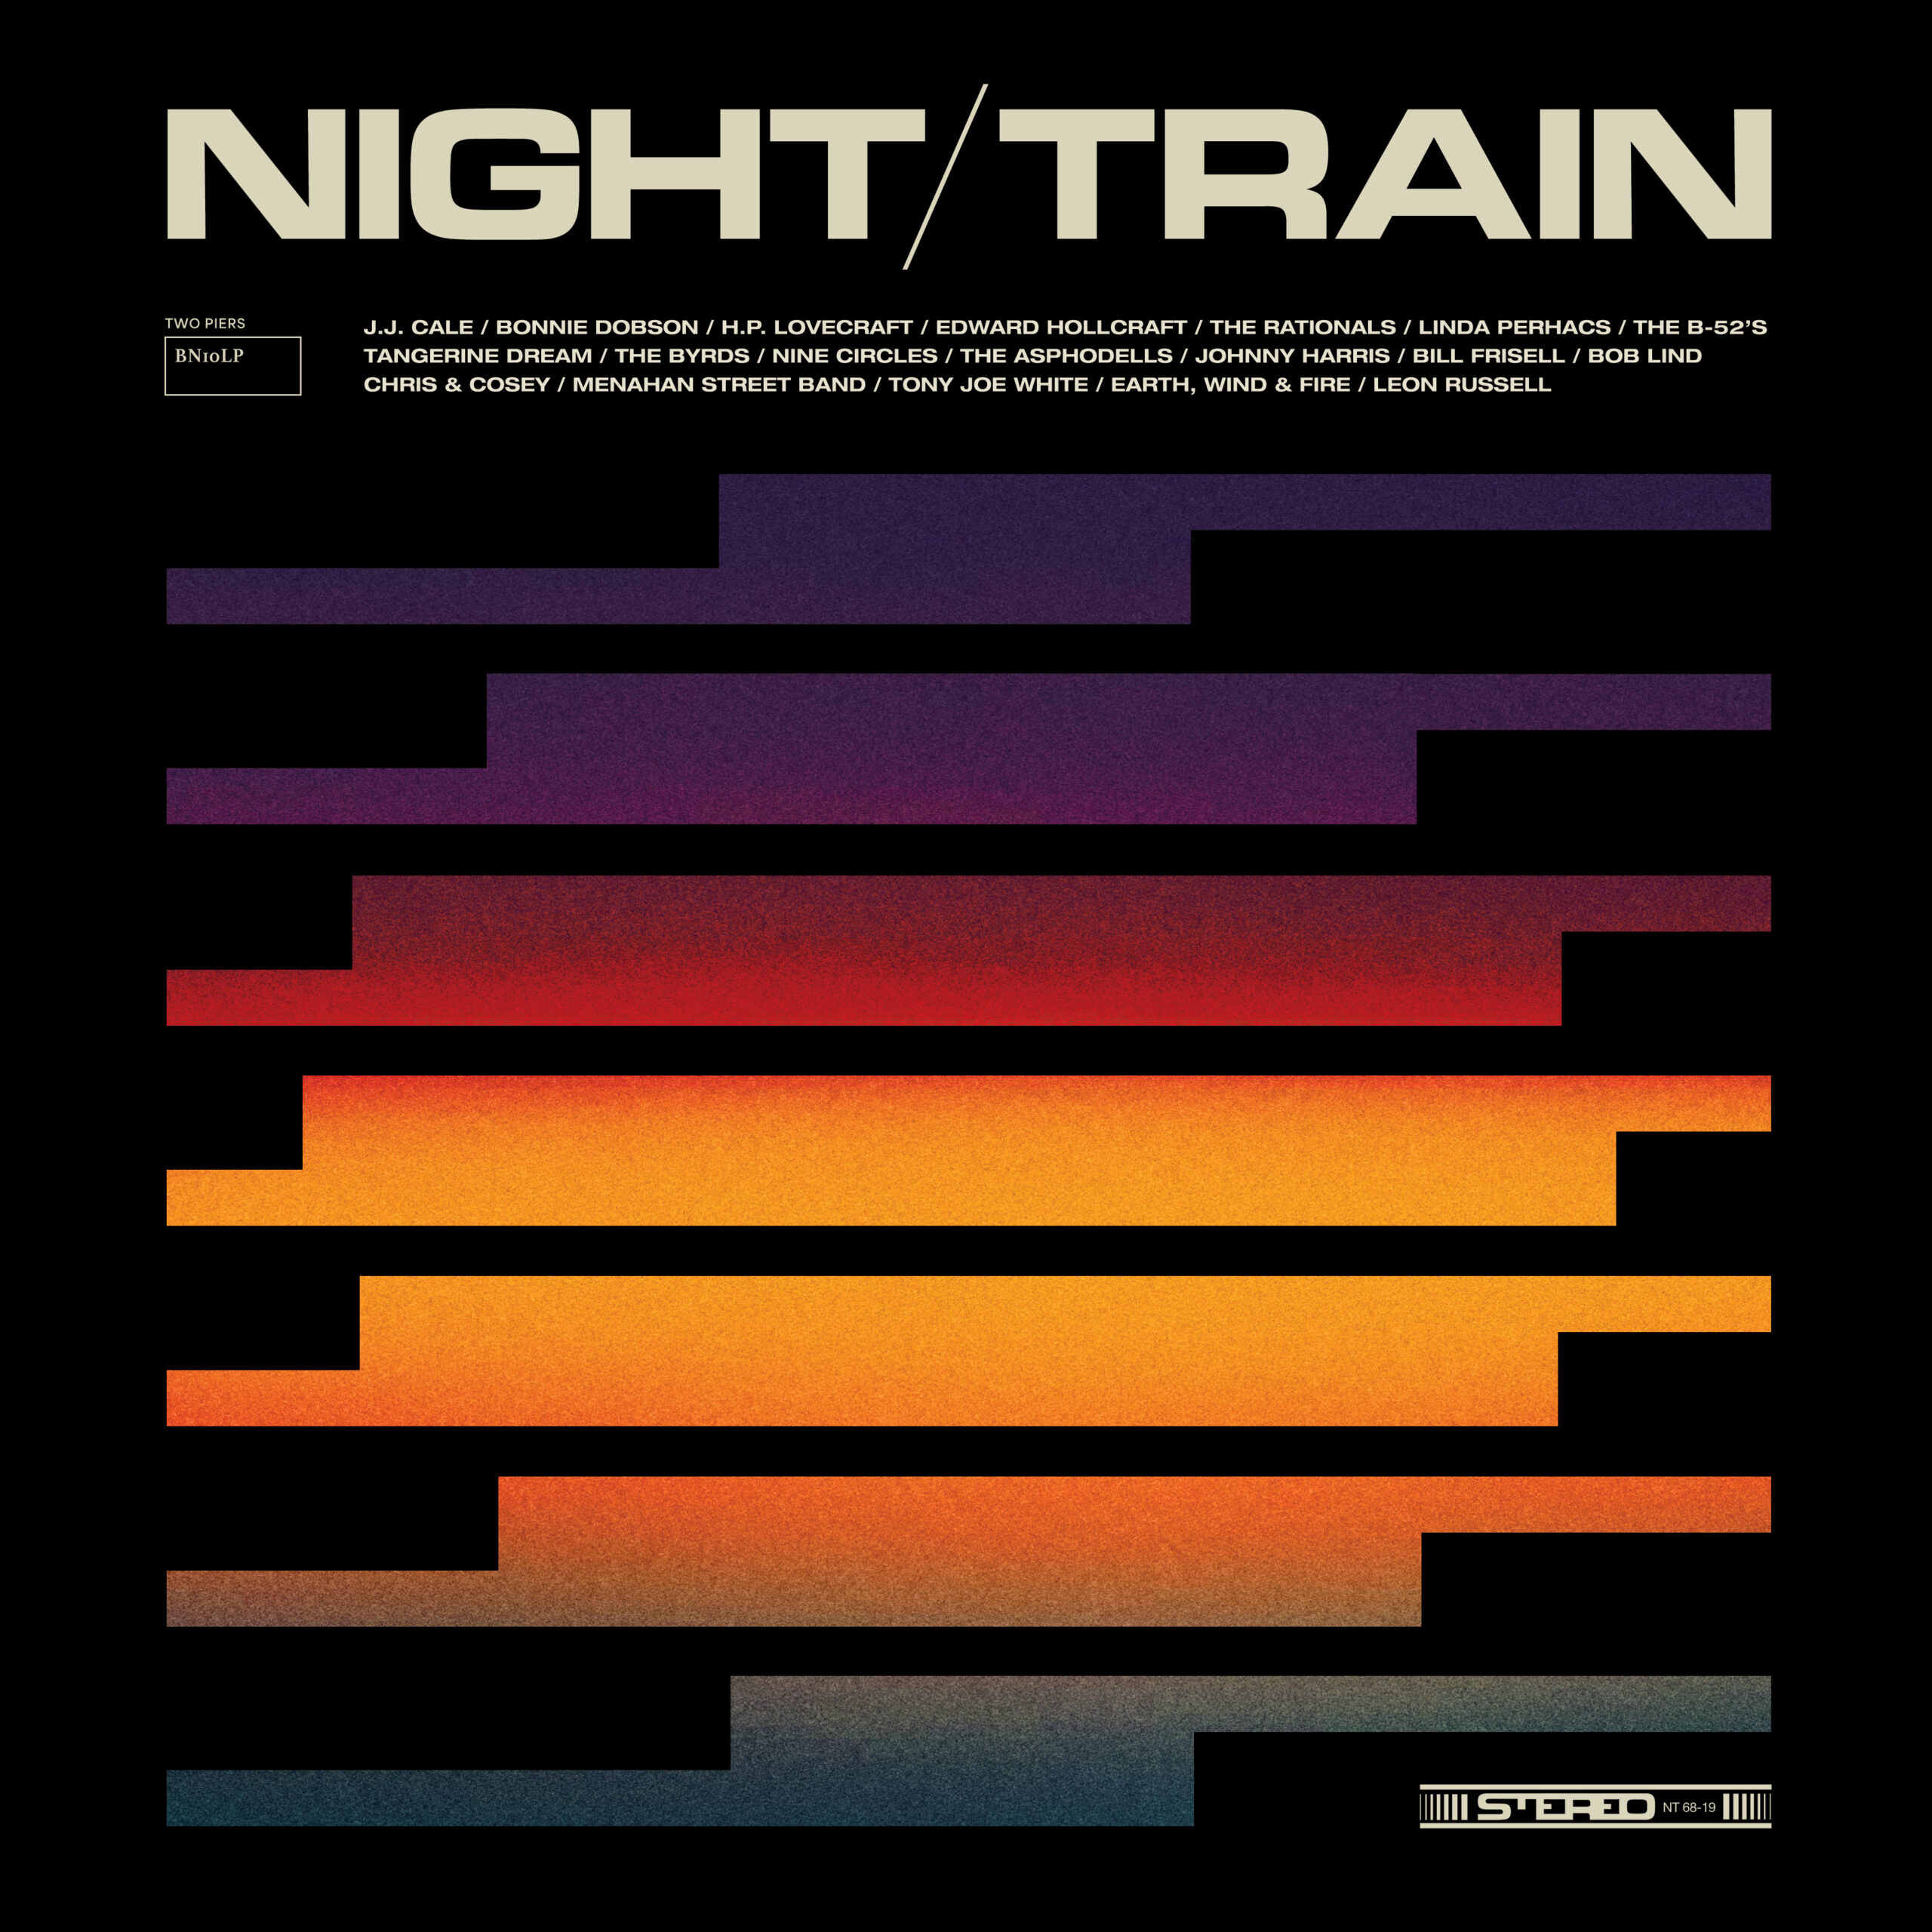 VARIOUS ARTISTS – NIGHT TRAIN: TRANSCONTINENTAL LANDSCAPES 1968-2019